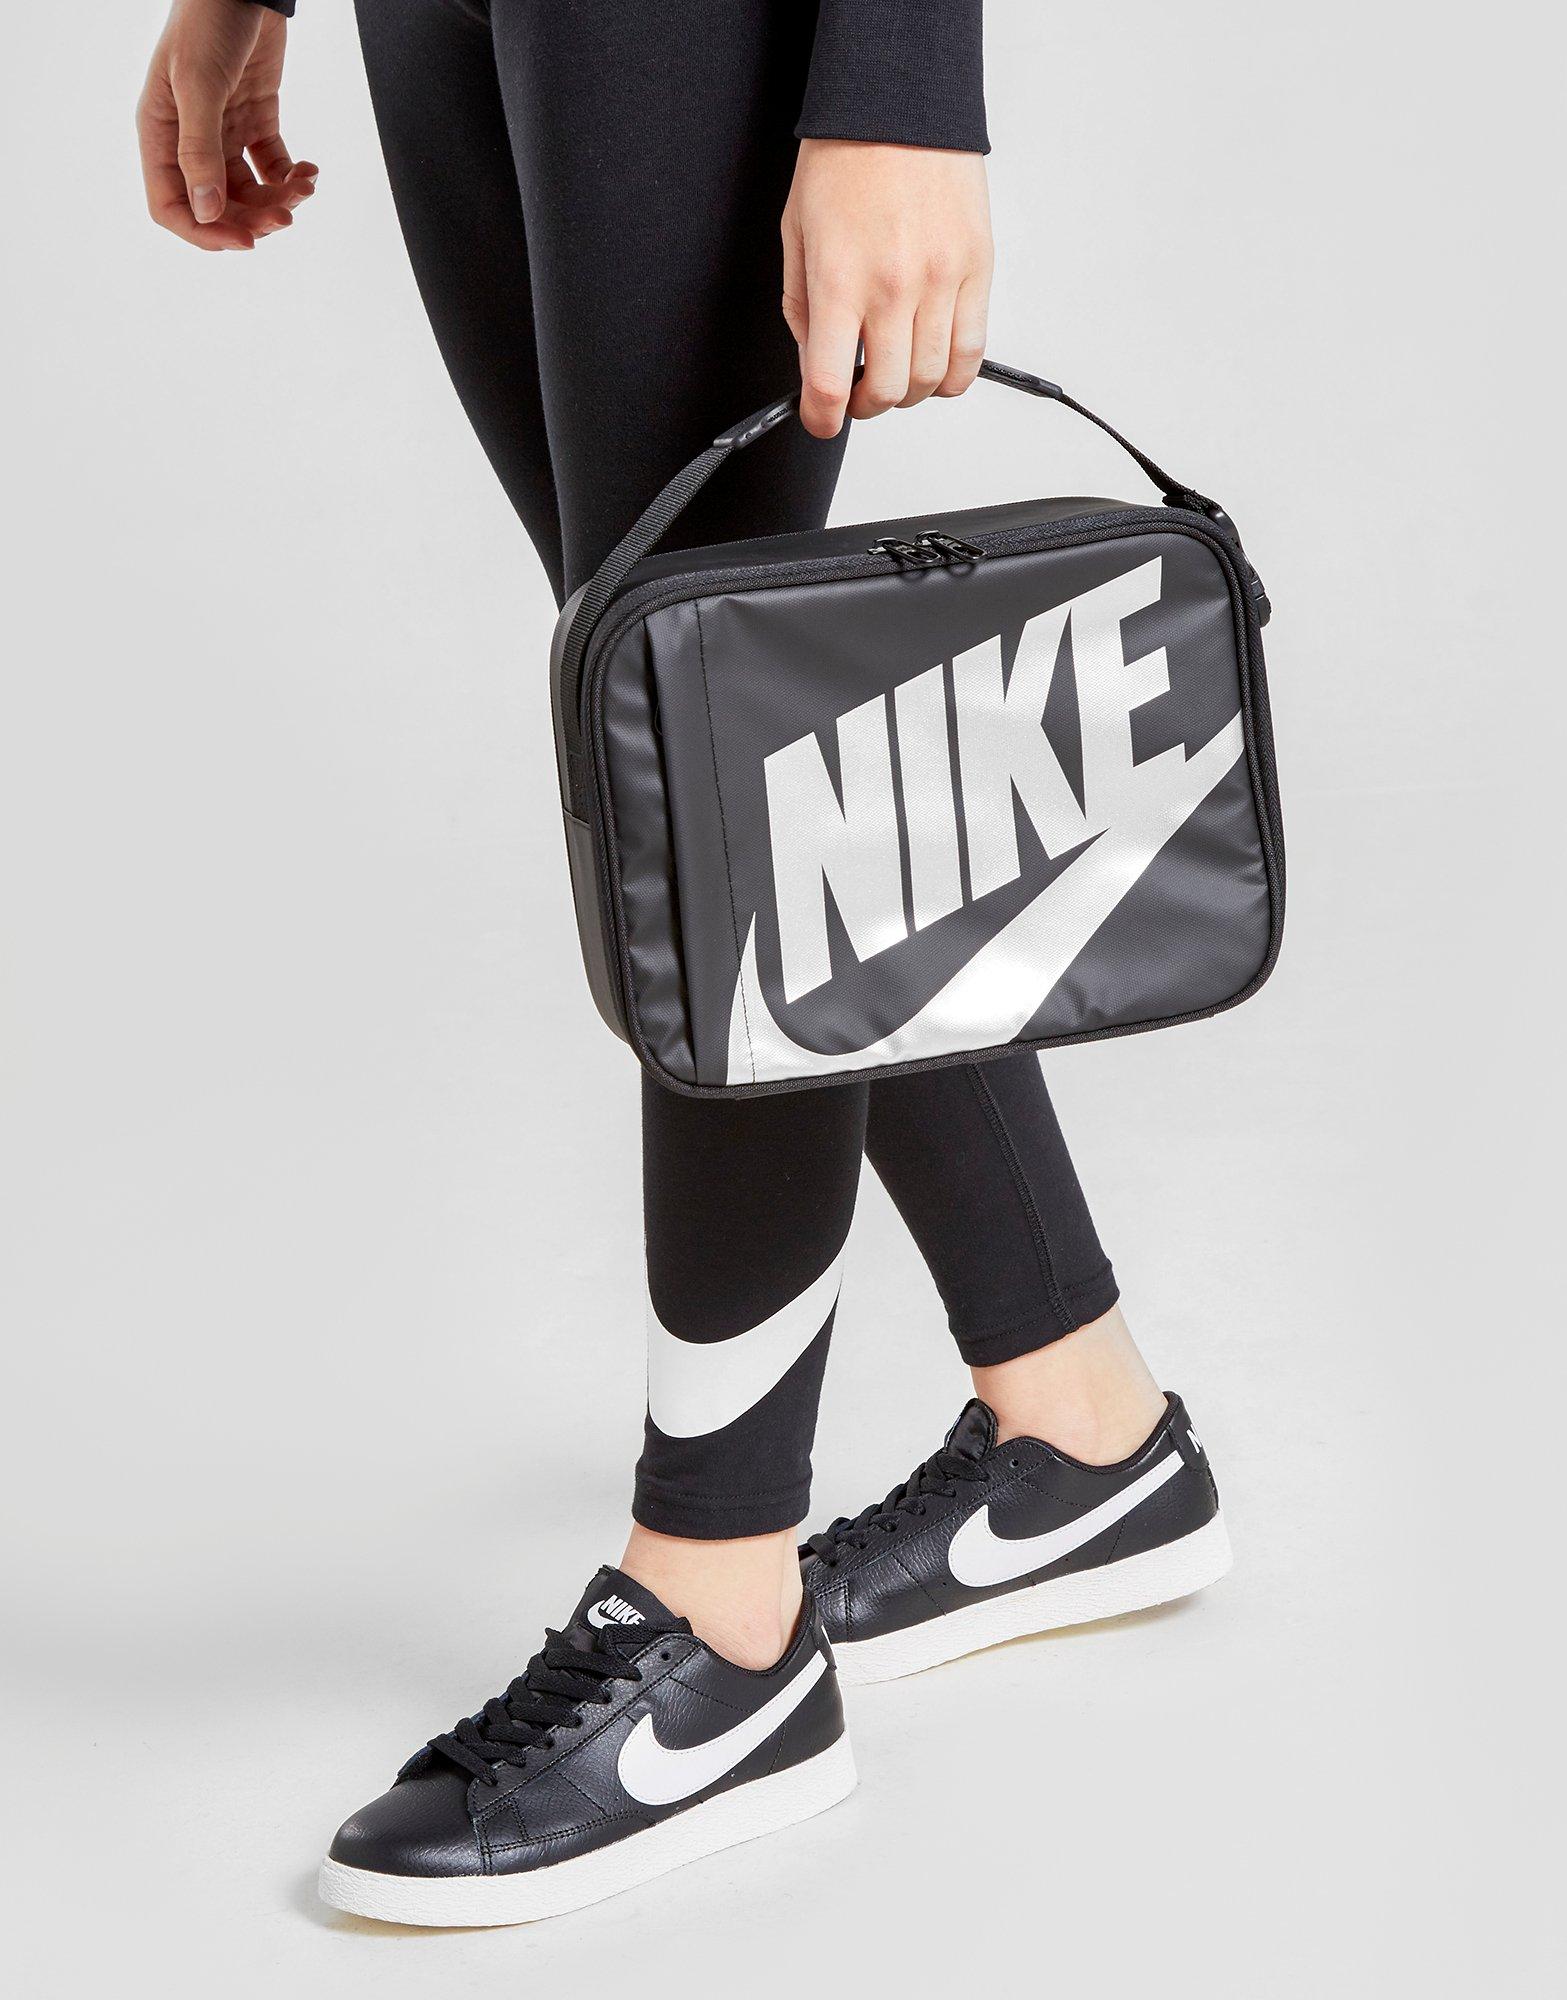 nike futura fuel pack lunch tote